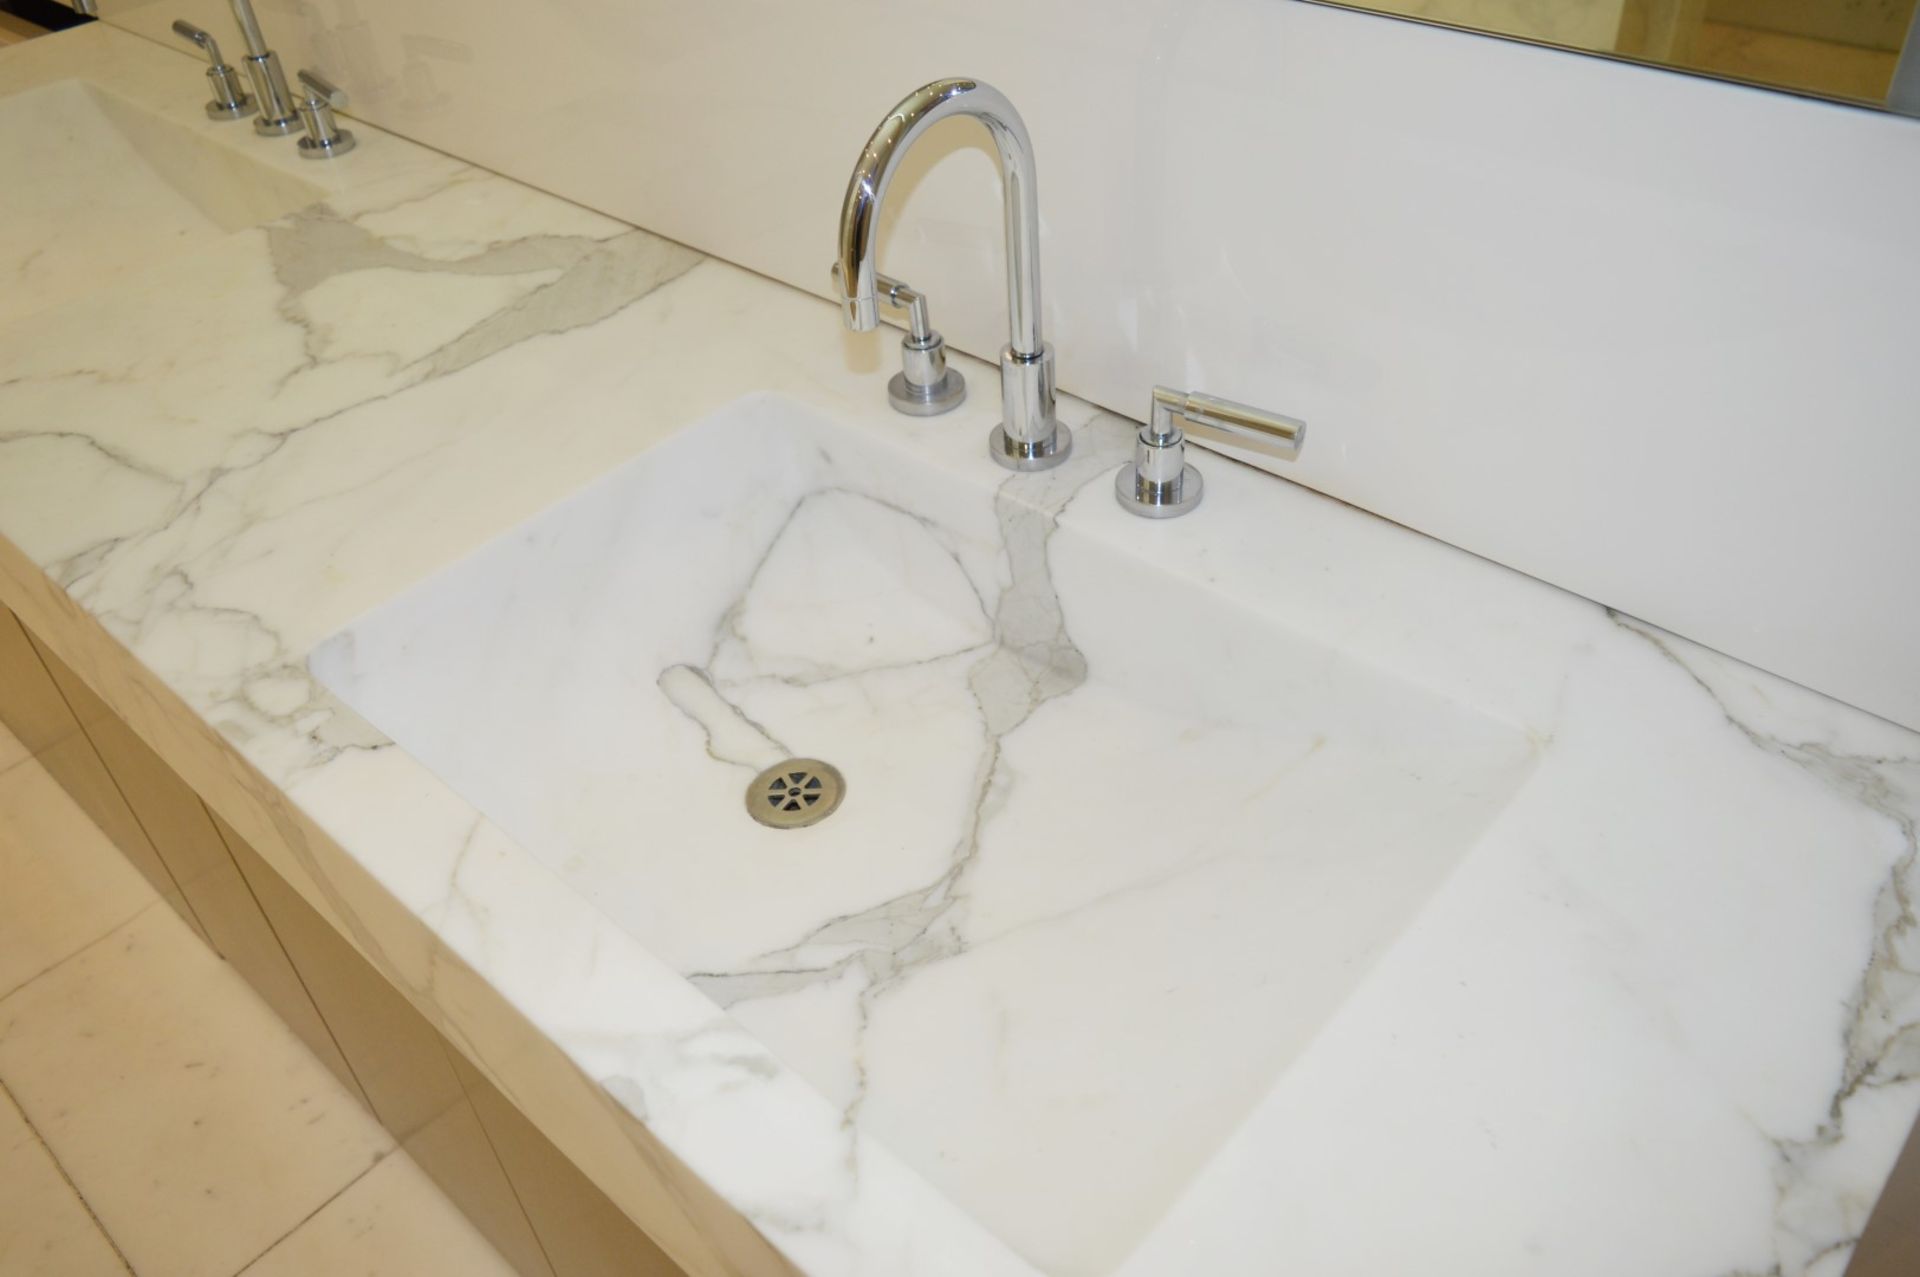 1 x Bespoke His & Hers Marble Bathroom Vanity Unit - Exquisite 7ft Twin Marble Sink Basin With Two - Image 7 of 25